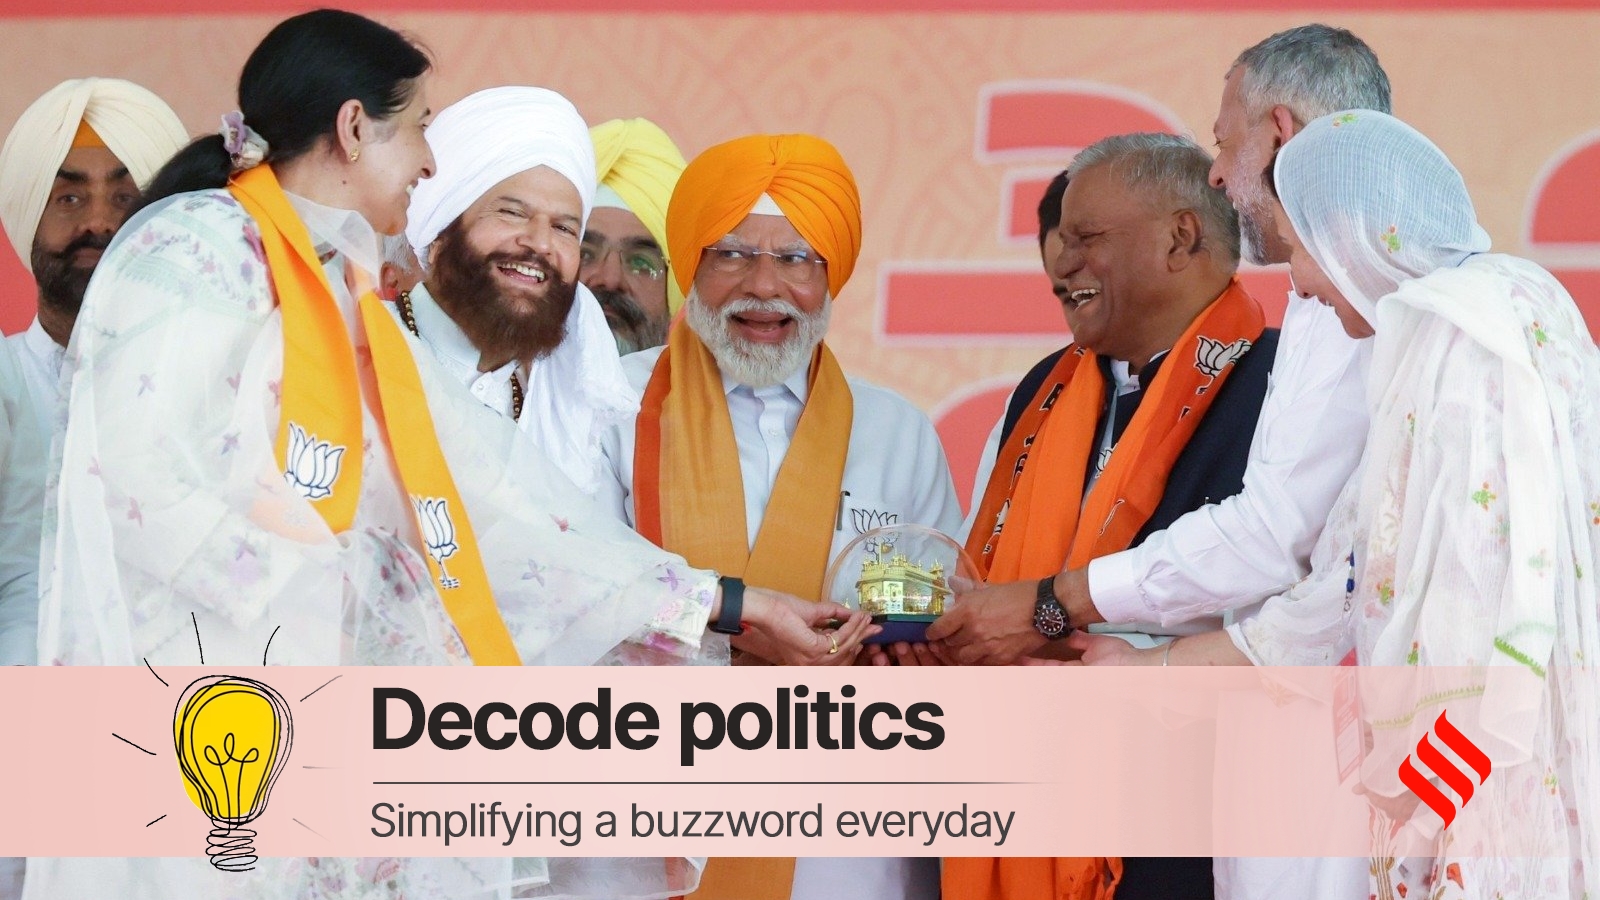 Decoding politics: PM Modi says he would have taken Kartarpur gurdwara in 1971. Could India have done it?  |  News from the political pulse